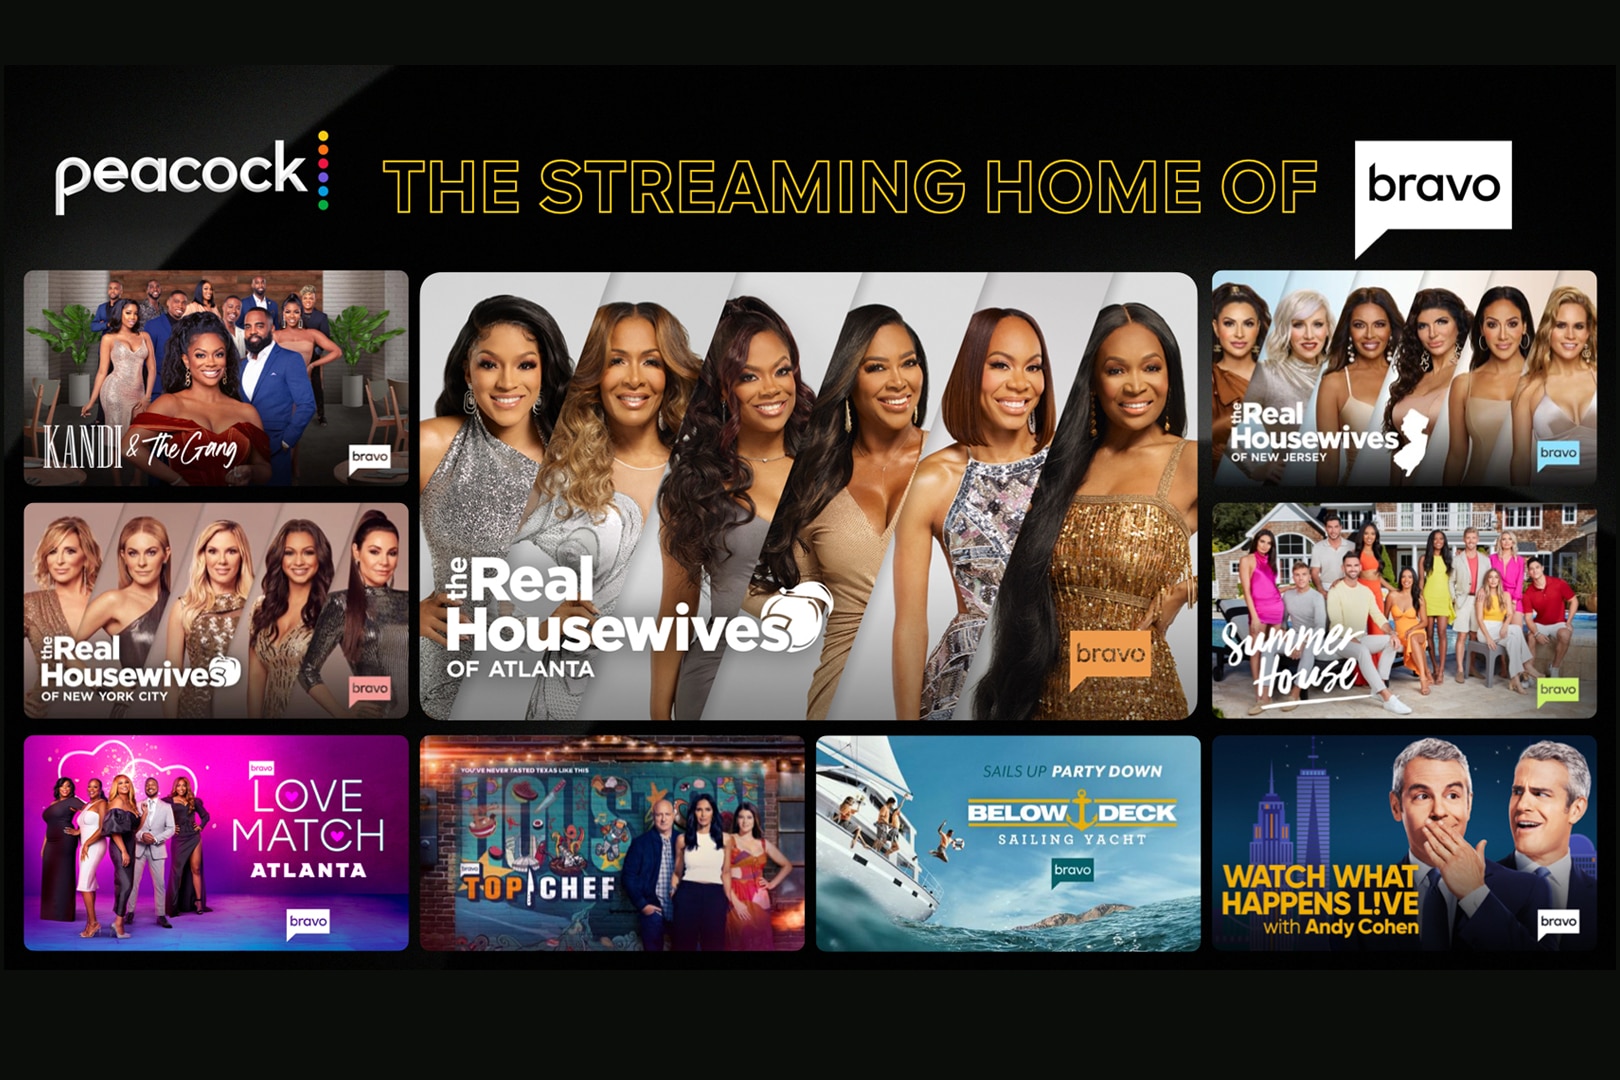 Peacock Streaming Home of Bravo: Details on How to Stream Bravo ...